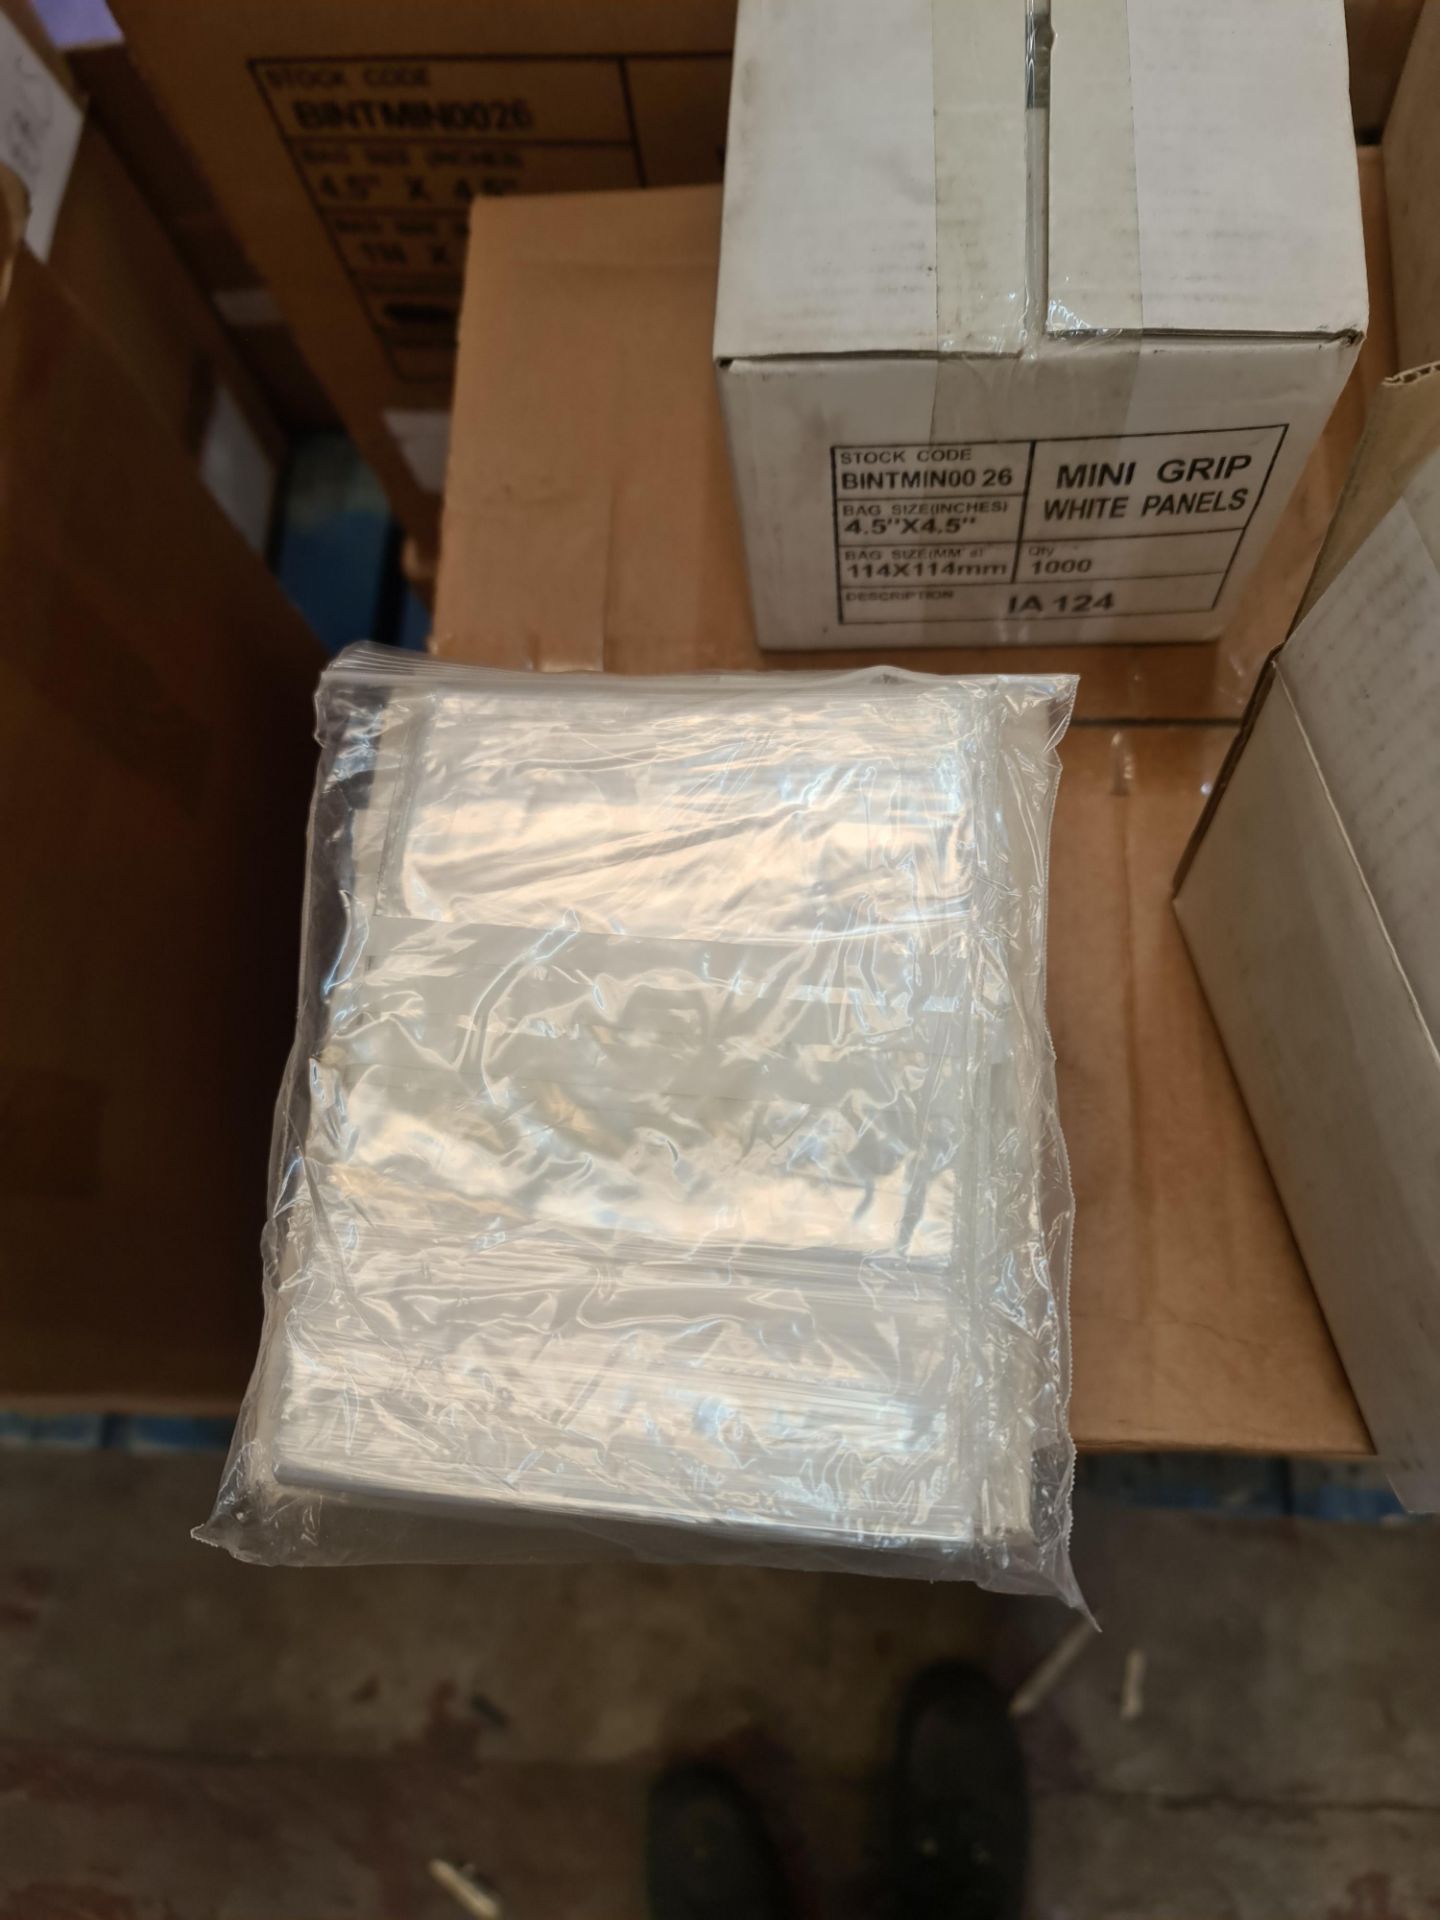 Approx. 28,000 Mini Grip white panel bags, size 114 x 114mm - 2 cartons plus 4 smaller boxes